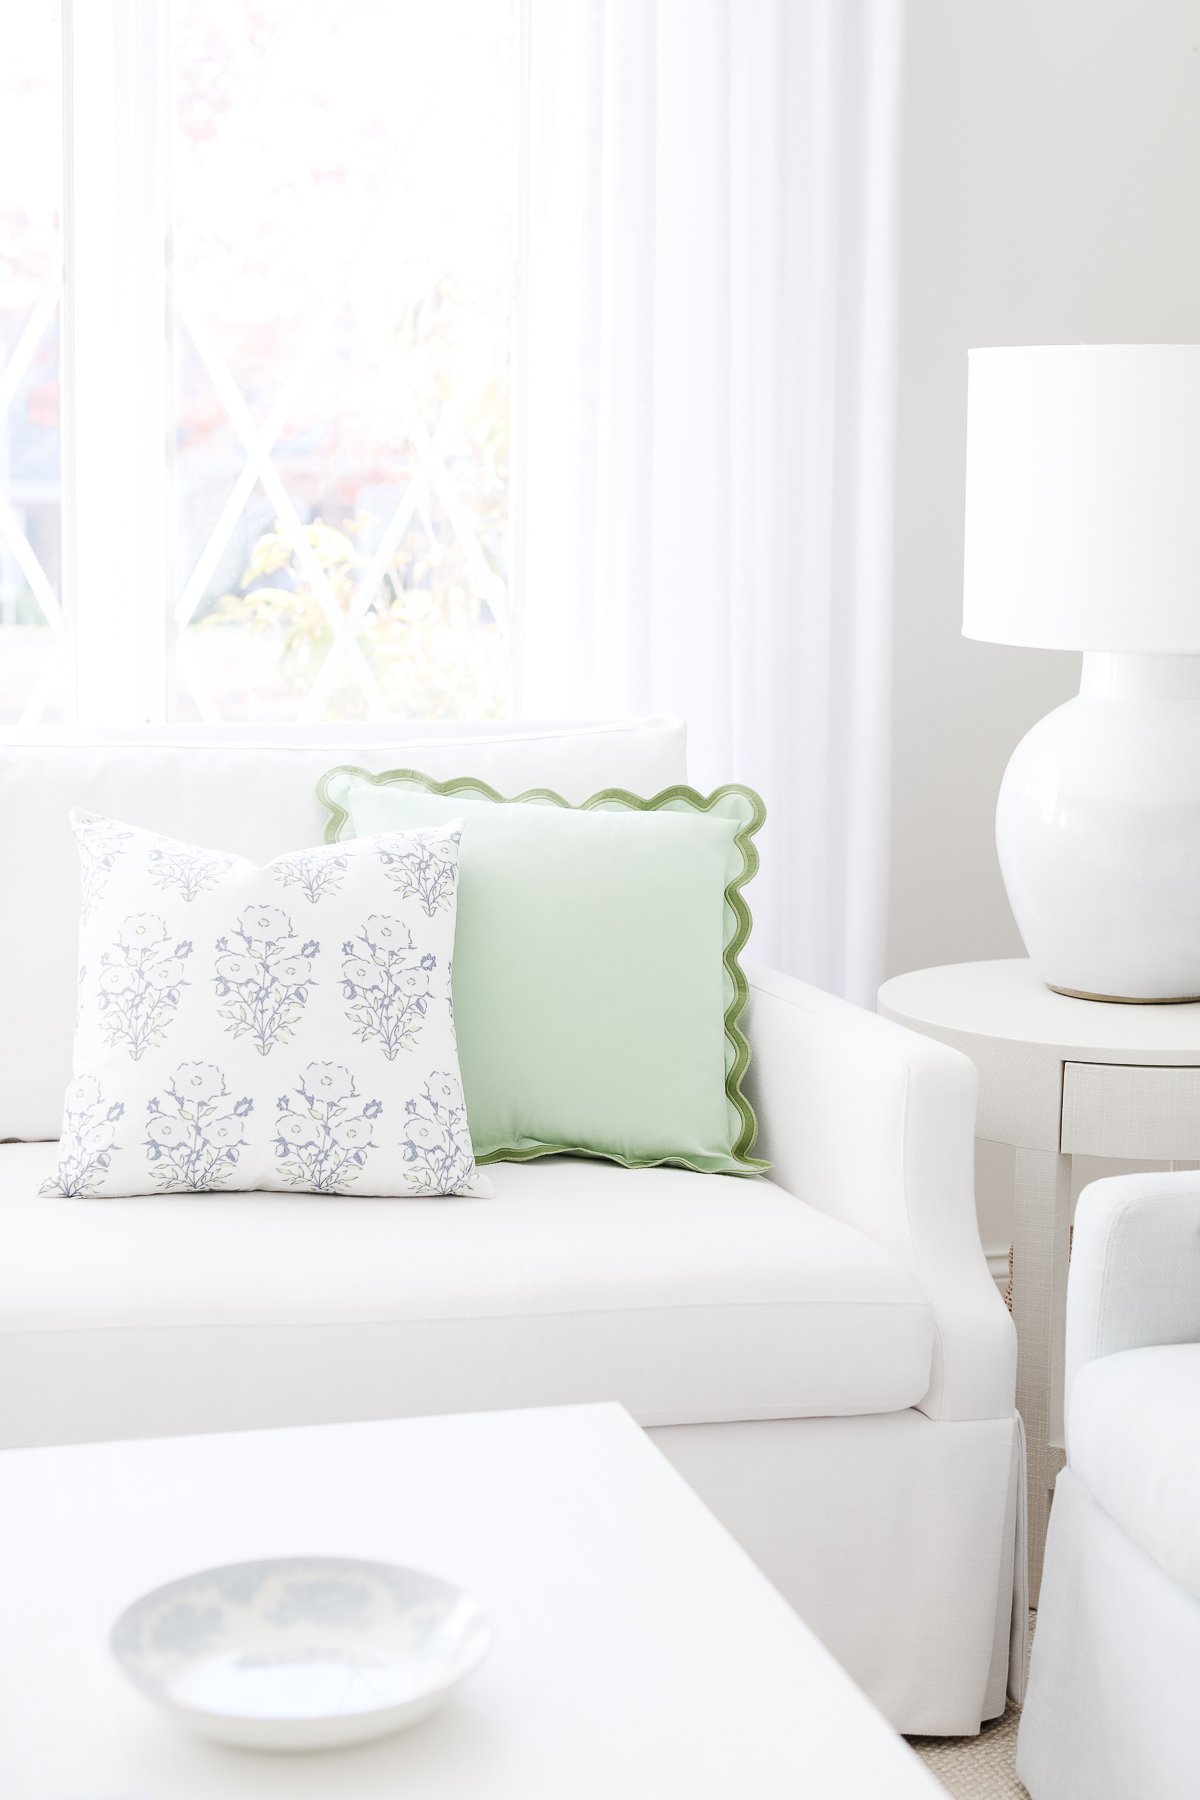 A white couch with scalloped decor in a living room.